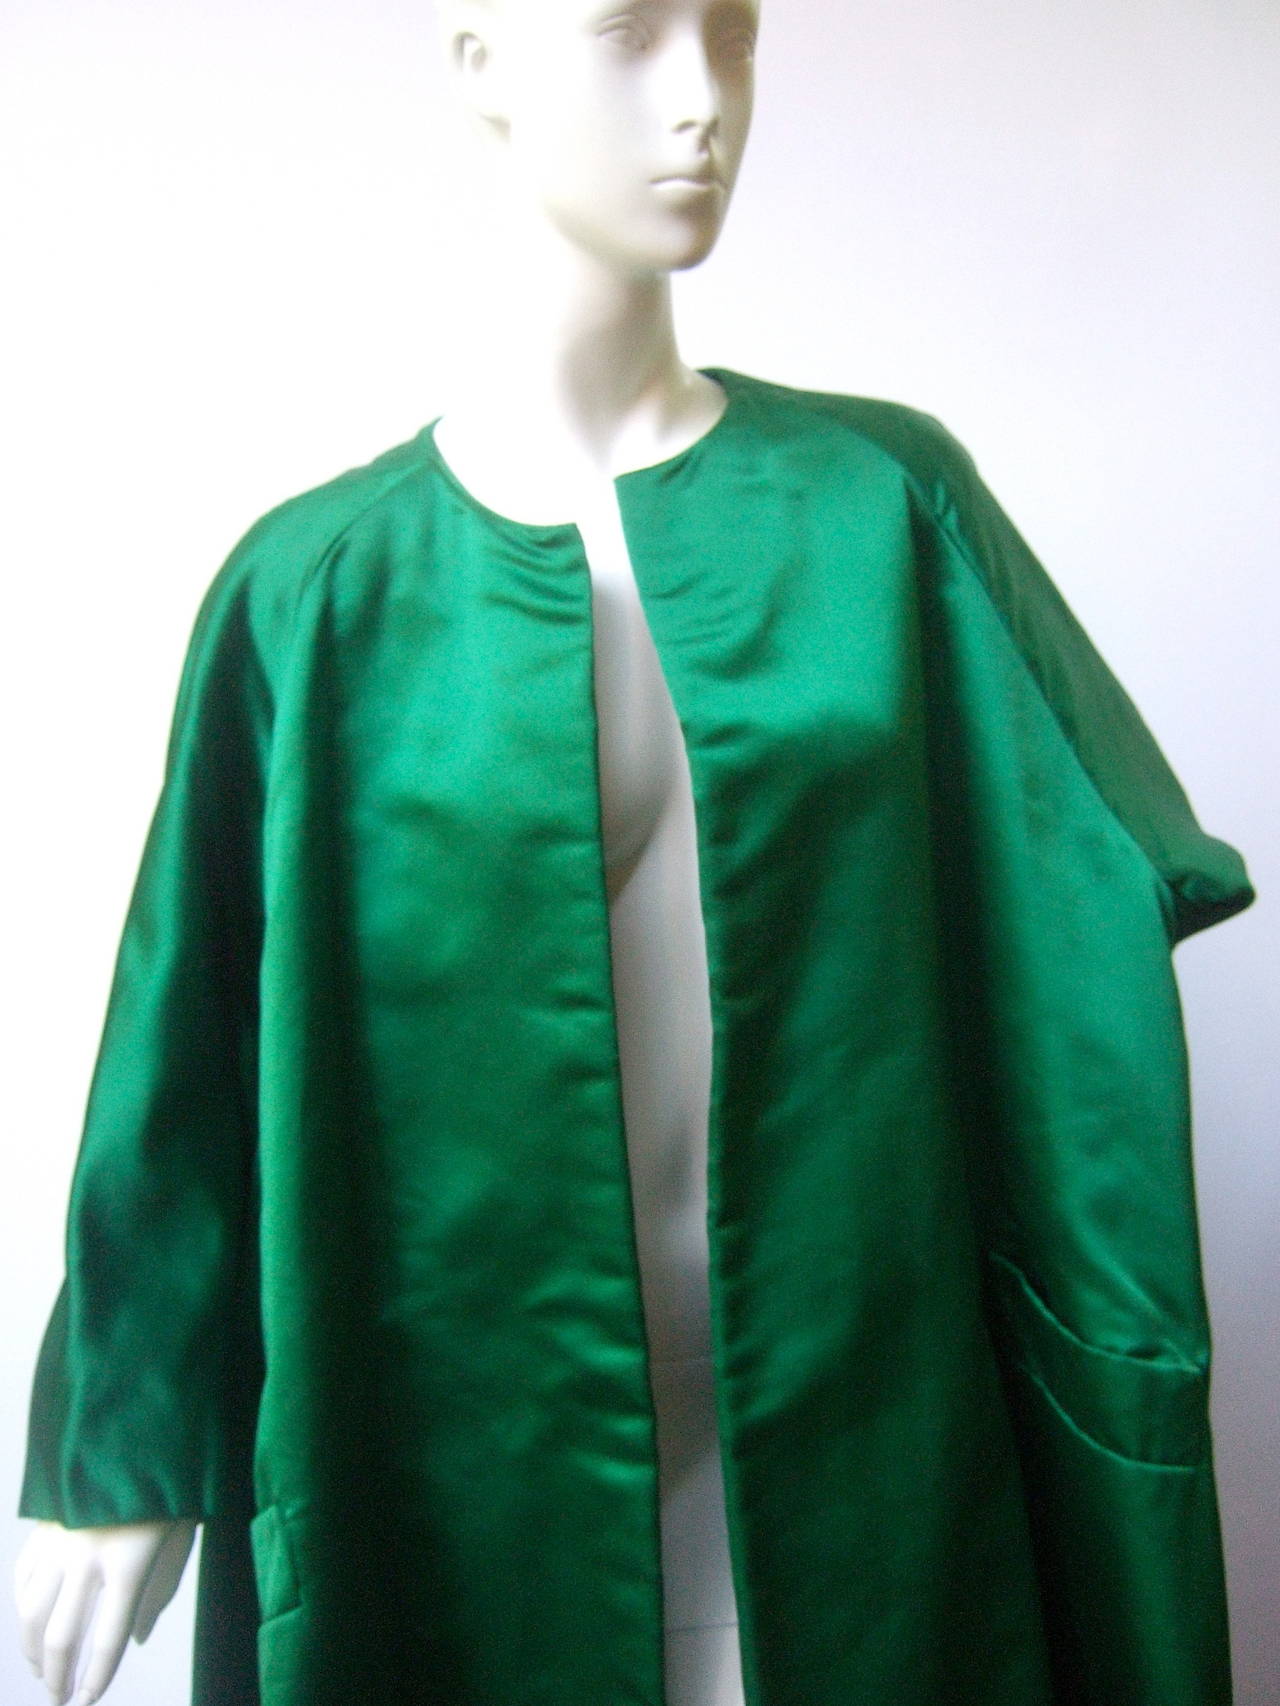 Neiman Marcus Emerald green duchess satin evening coat c 1960
The couture style coat is designed with sumptuous silk satin fabric
The chic evening coat is designed without any buttons or closures 

The voluminous coat has a slight flared